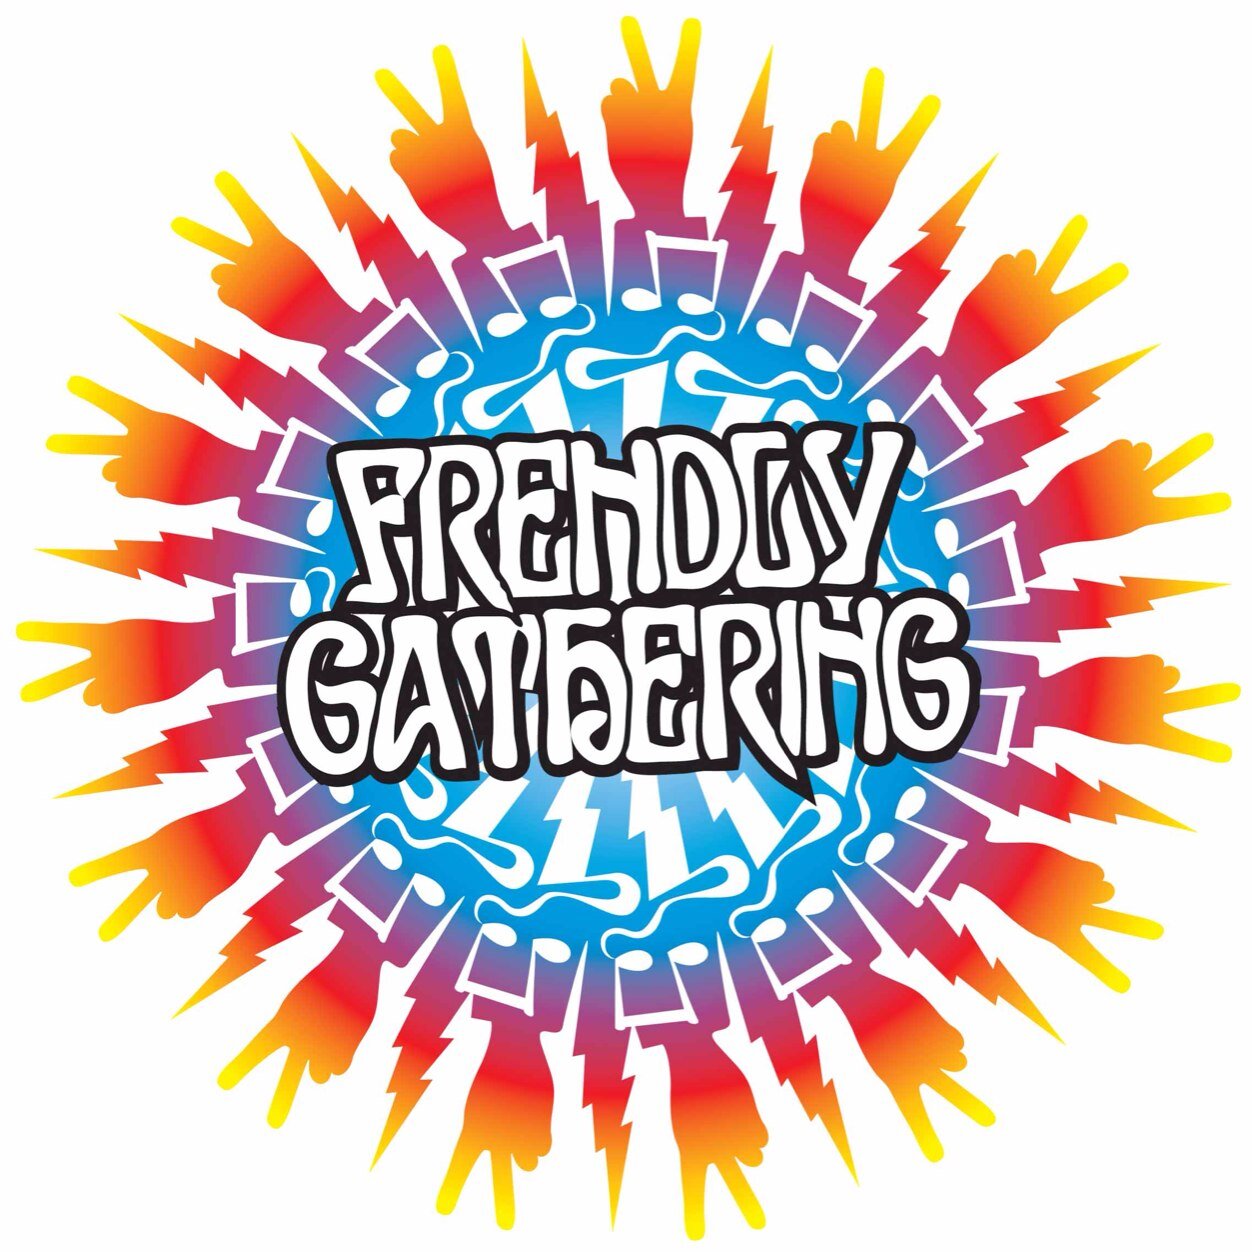 June 30 - July 2, 2017 | Vermont-based Frendly Gathering put on for you and your frends to get together and have the time of your lives. #livefrendly